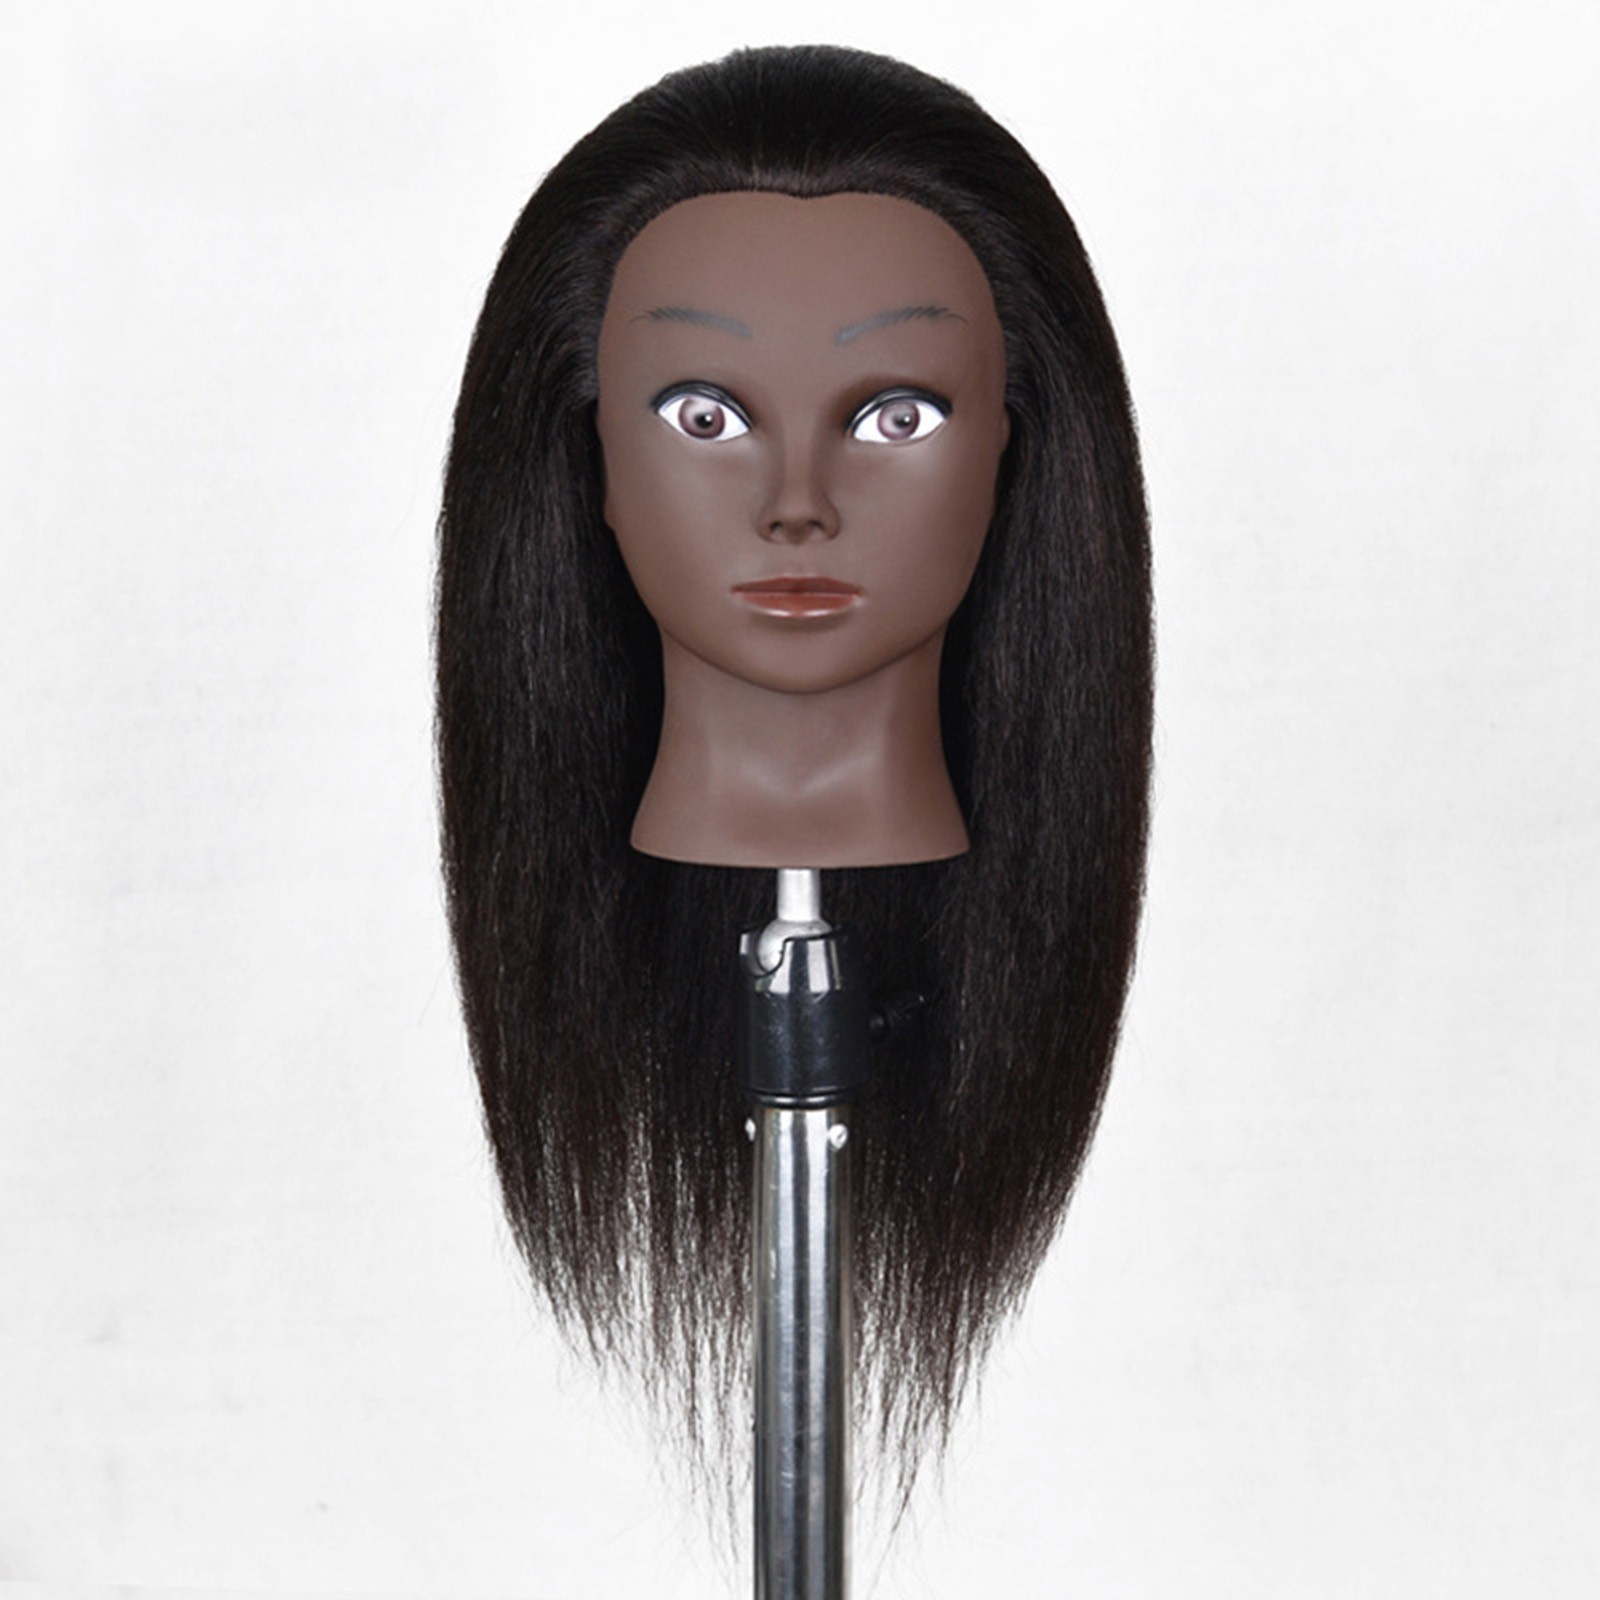 Keusn African American Mannequin Head Real Hair Manikin Head for Styling Black 16inch, Girl's, Size: One Size